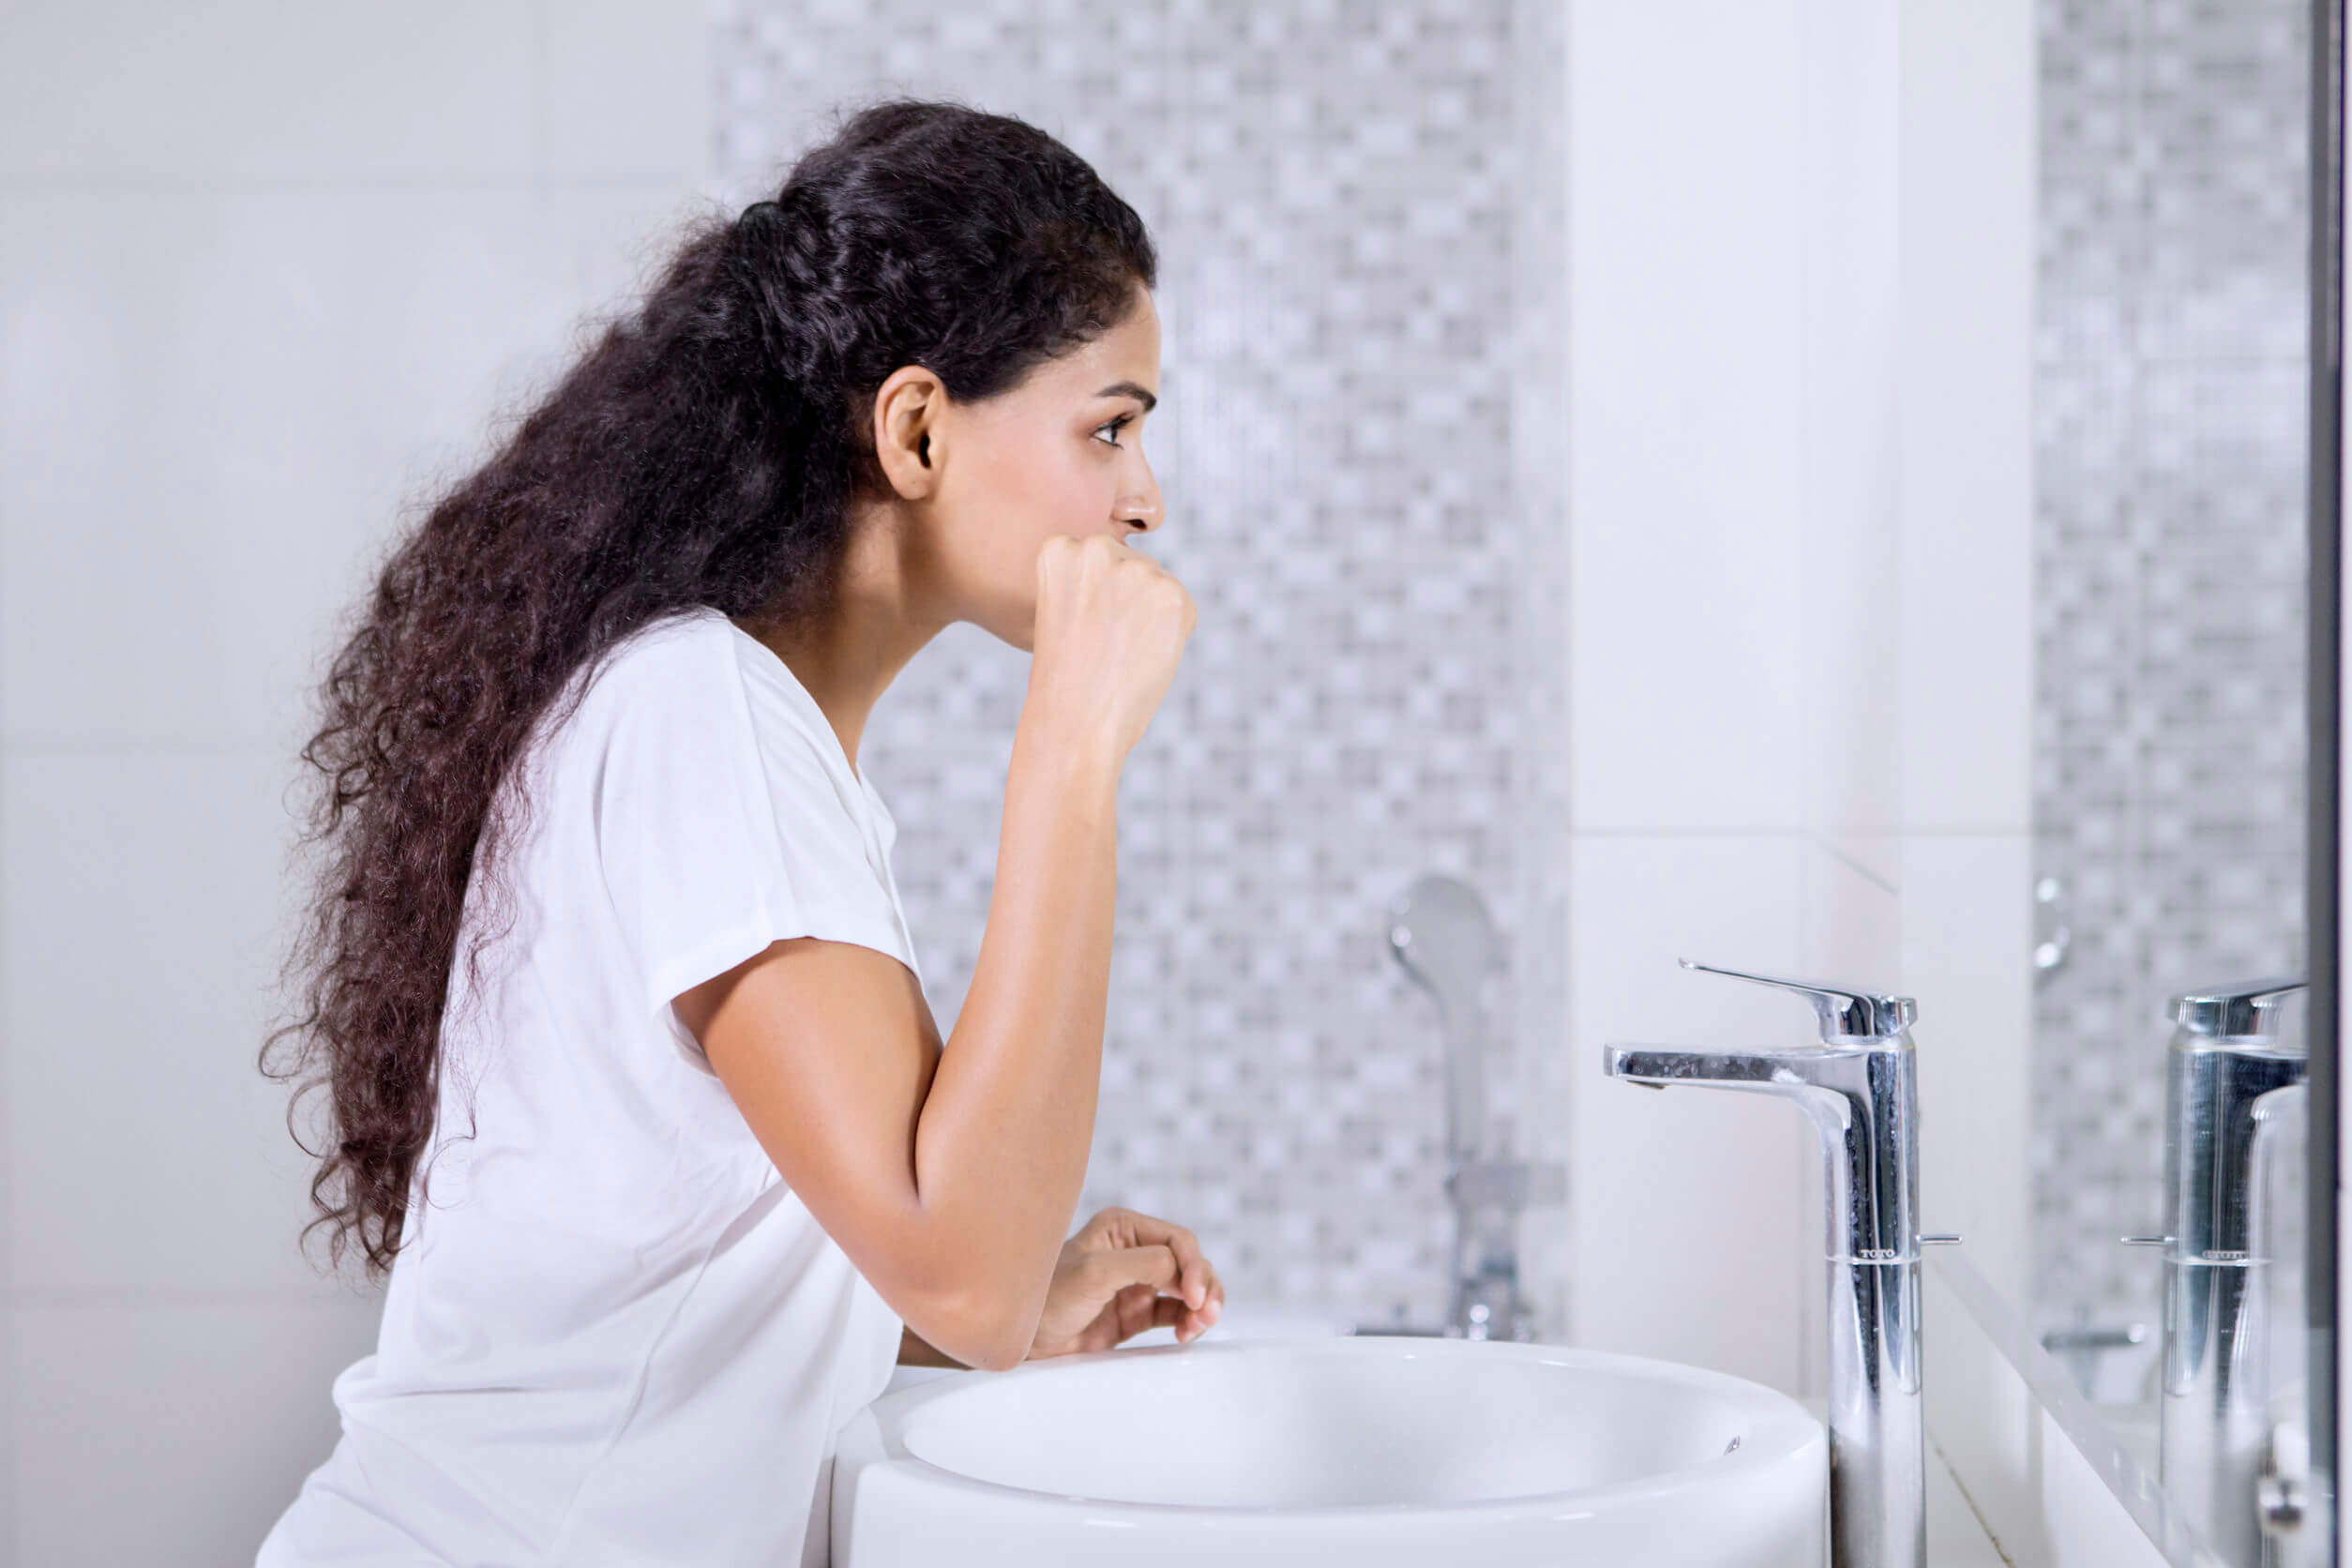 A woman looking in the mirror and brushing her teeth.